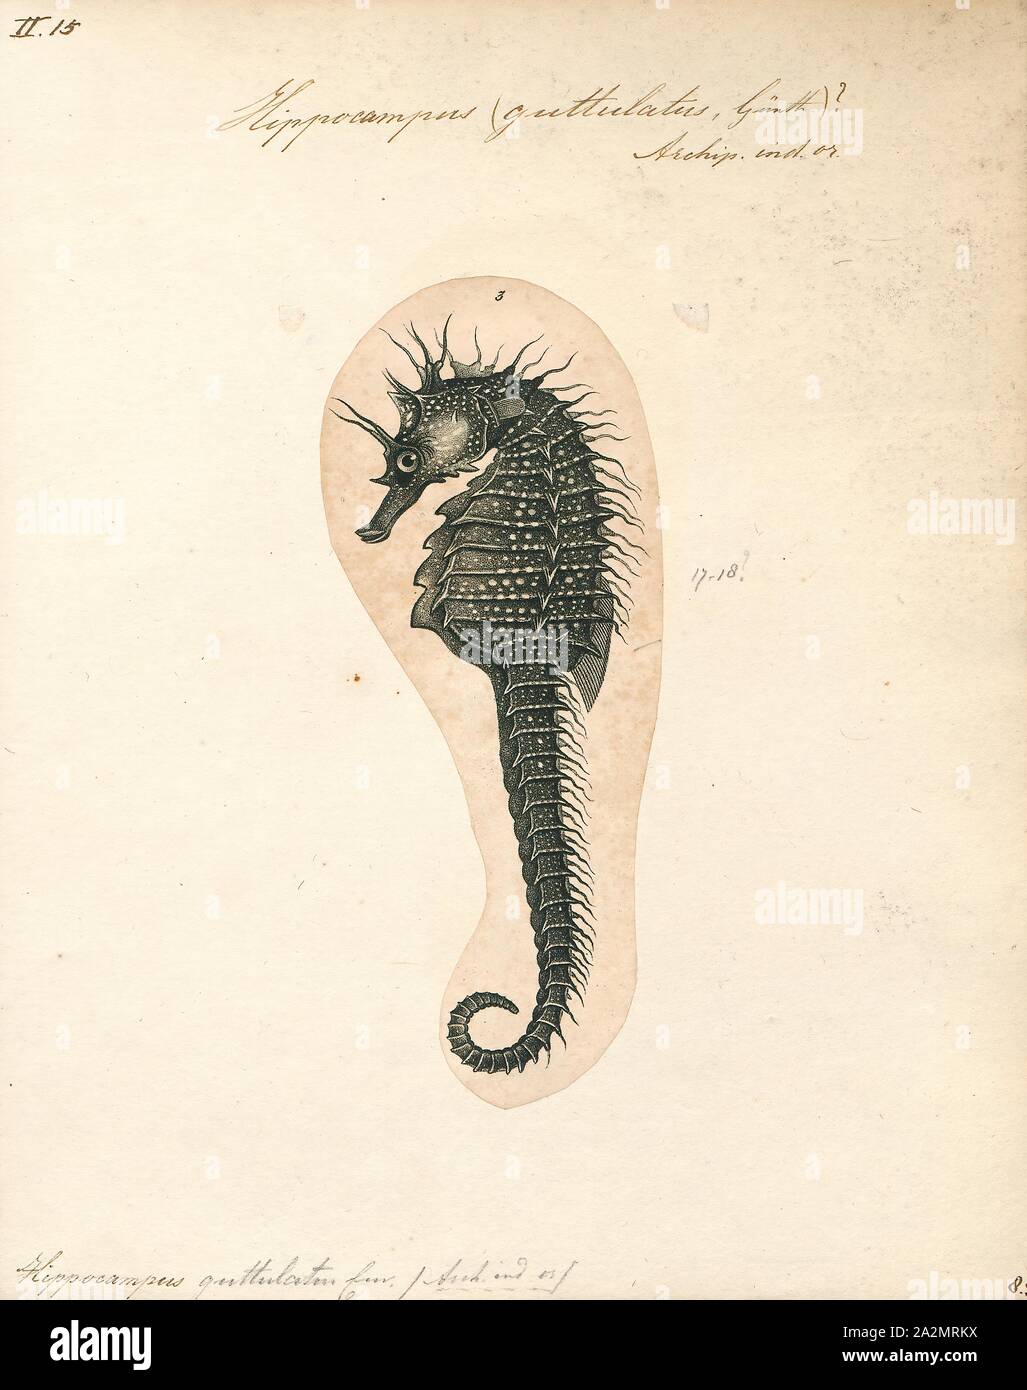 Hippocampus guttulatus, Print, Hippocampus guttulatus, commonly known as the long-snouted seahorse, is a marine fish belonging to the family Syngnathidae, native from the northeast Atlantic, including the Mediterranean., 1700-1880 Stock Photo